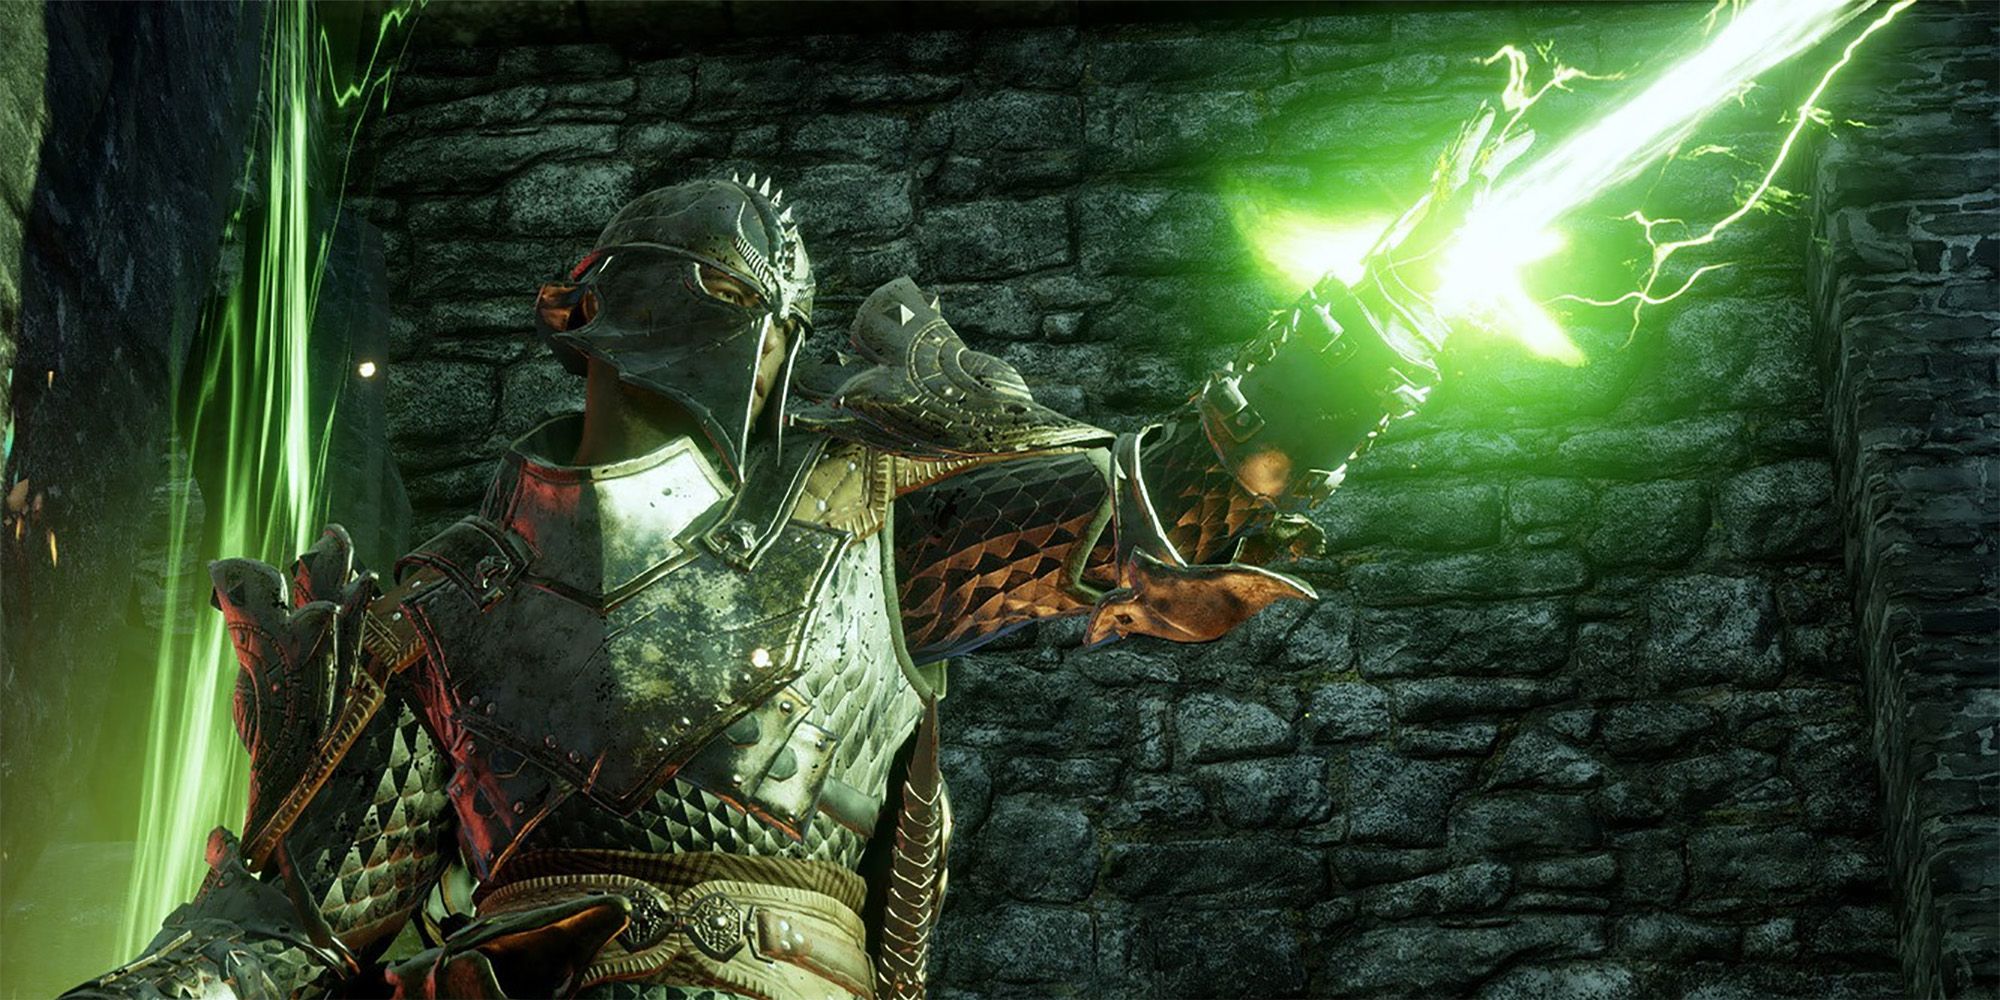 the Inquisitor closes a rift with green light